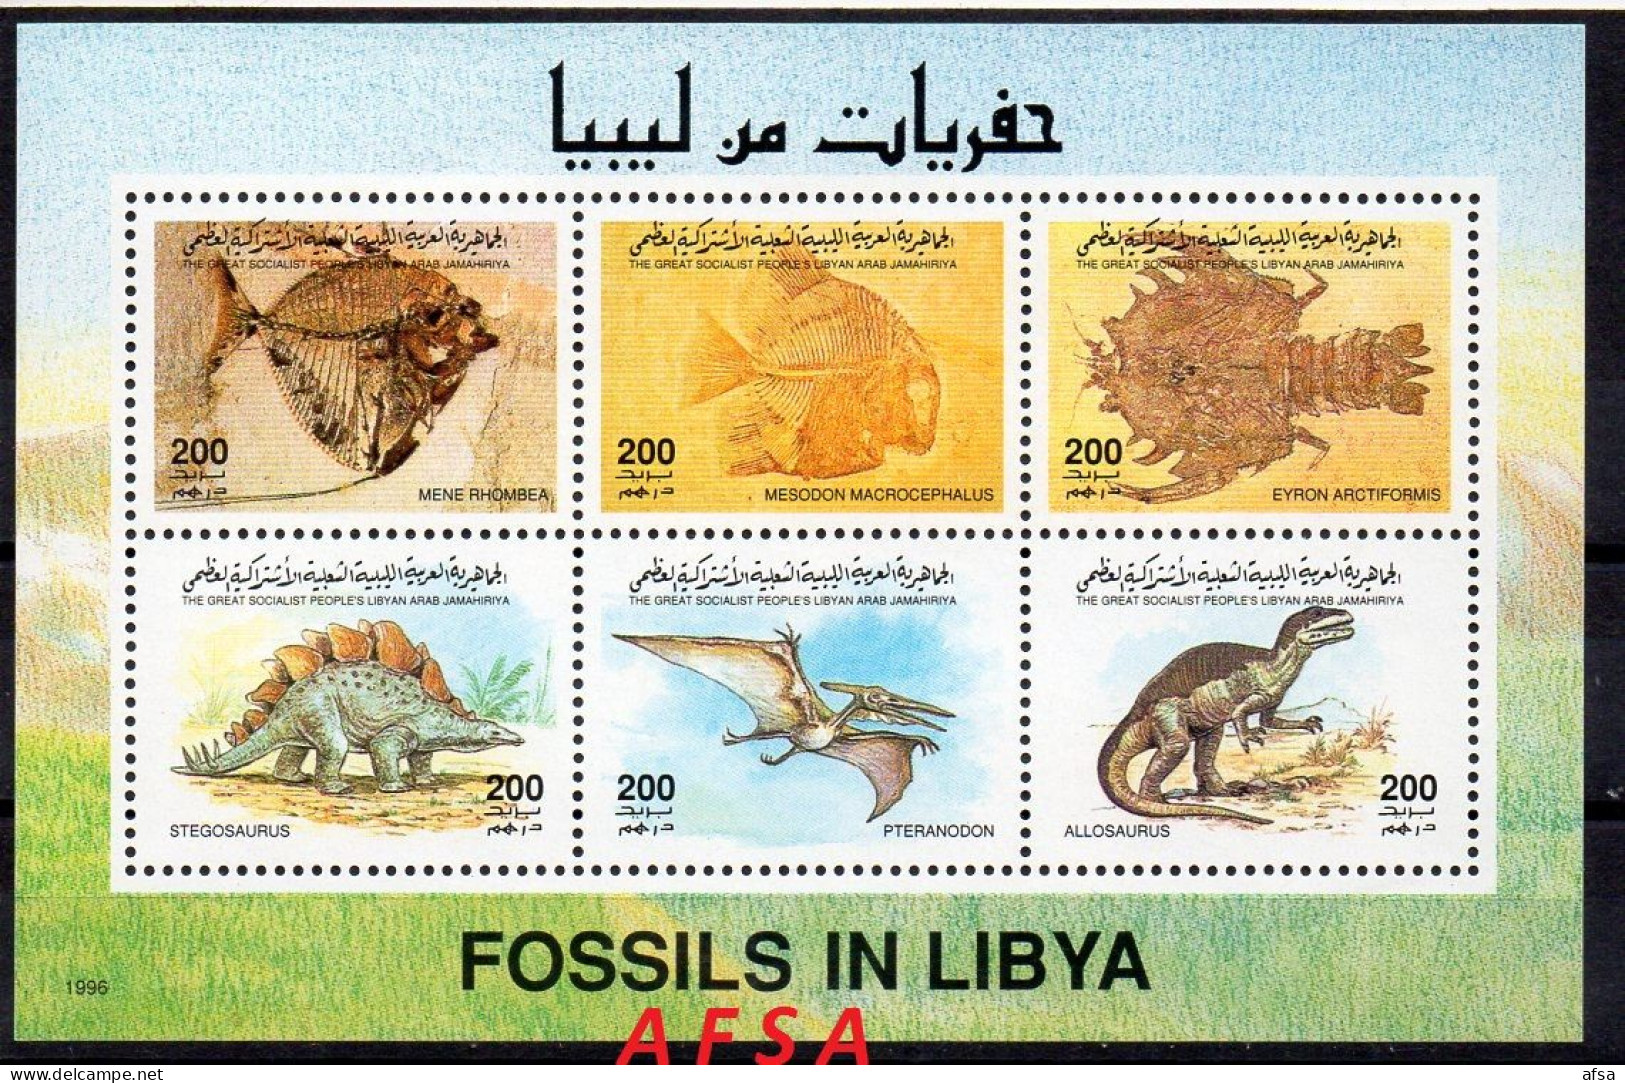 Libya 1996-Fossils And Dinosaurs-MNH** //  Libye 1996-Fossiles Et Dinosaures-Neuf** - Fossils